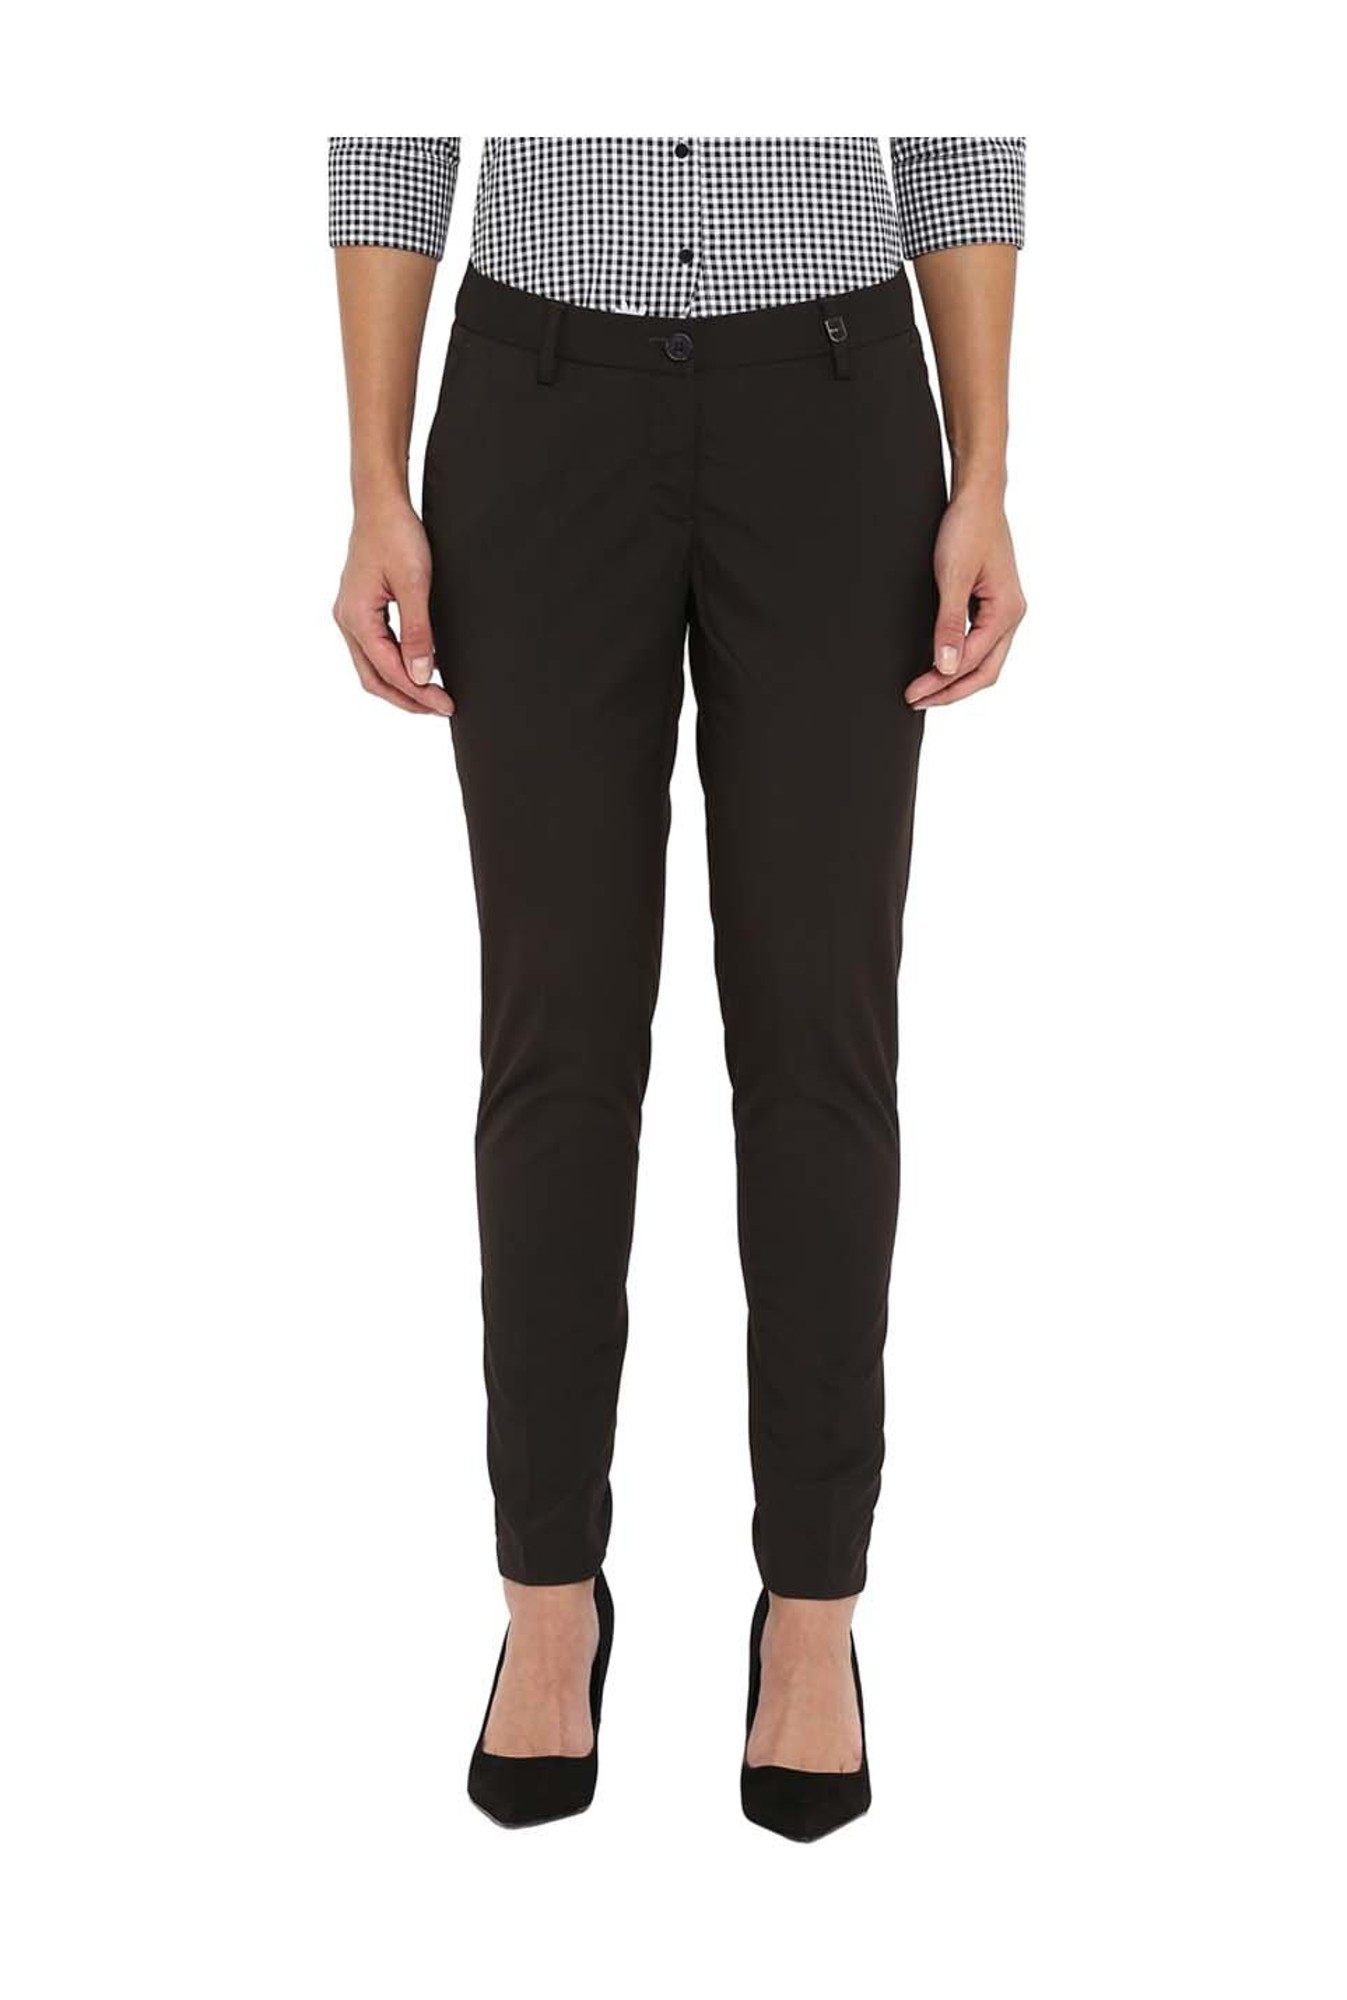 Womens Black Button Tapered Leg Trousers  Peacocks